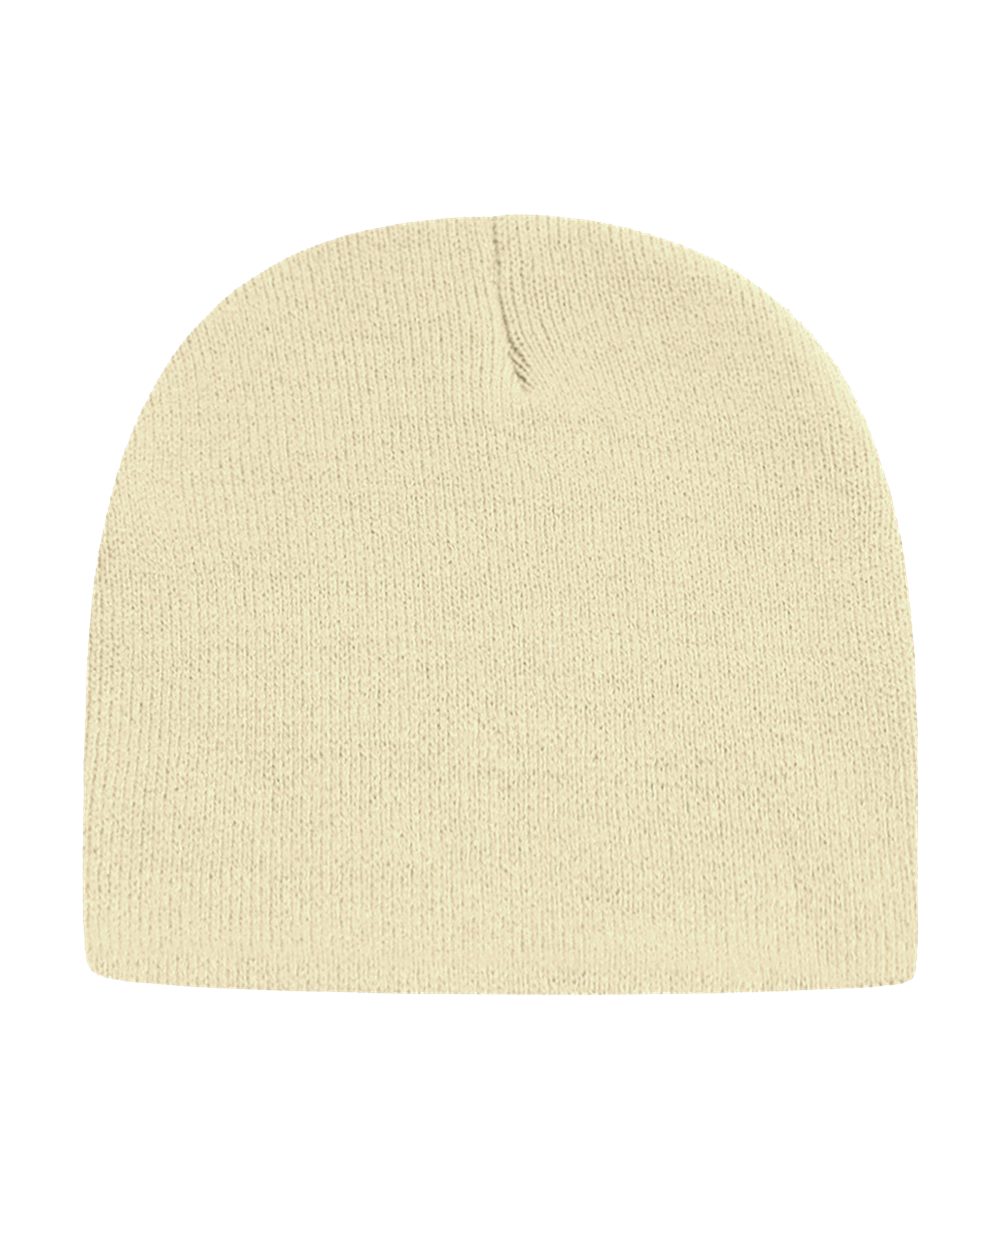 CAP AMERICA SKN28 - USA-Made Sustainable Beanie